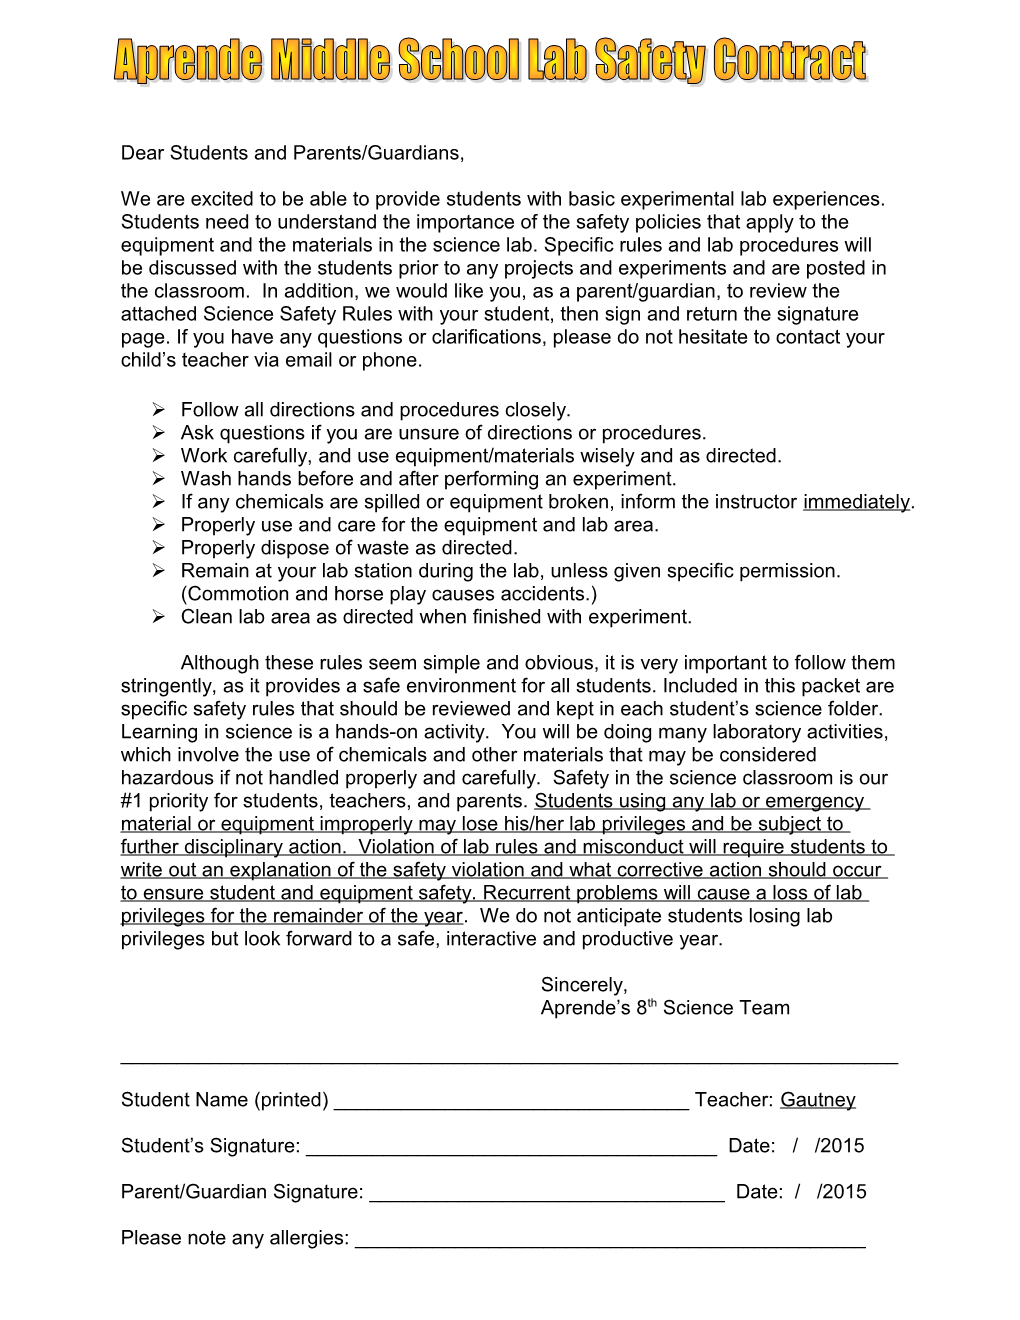 Kyrene Aprende Middle School Lab Safety Contract